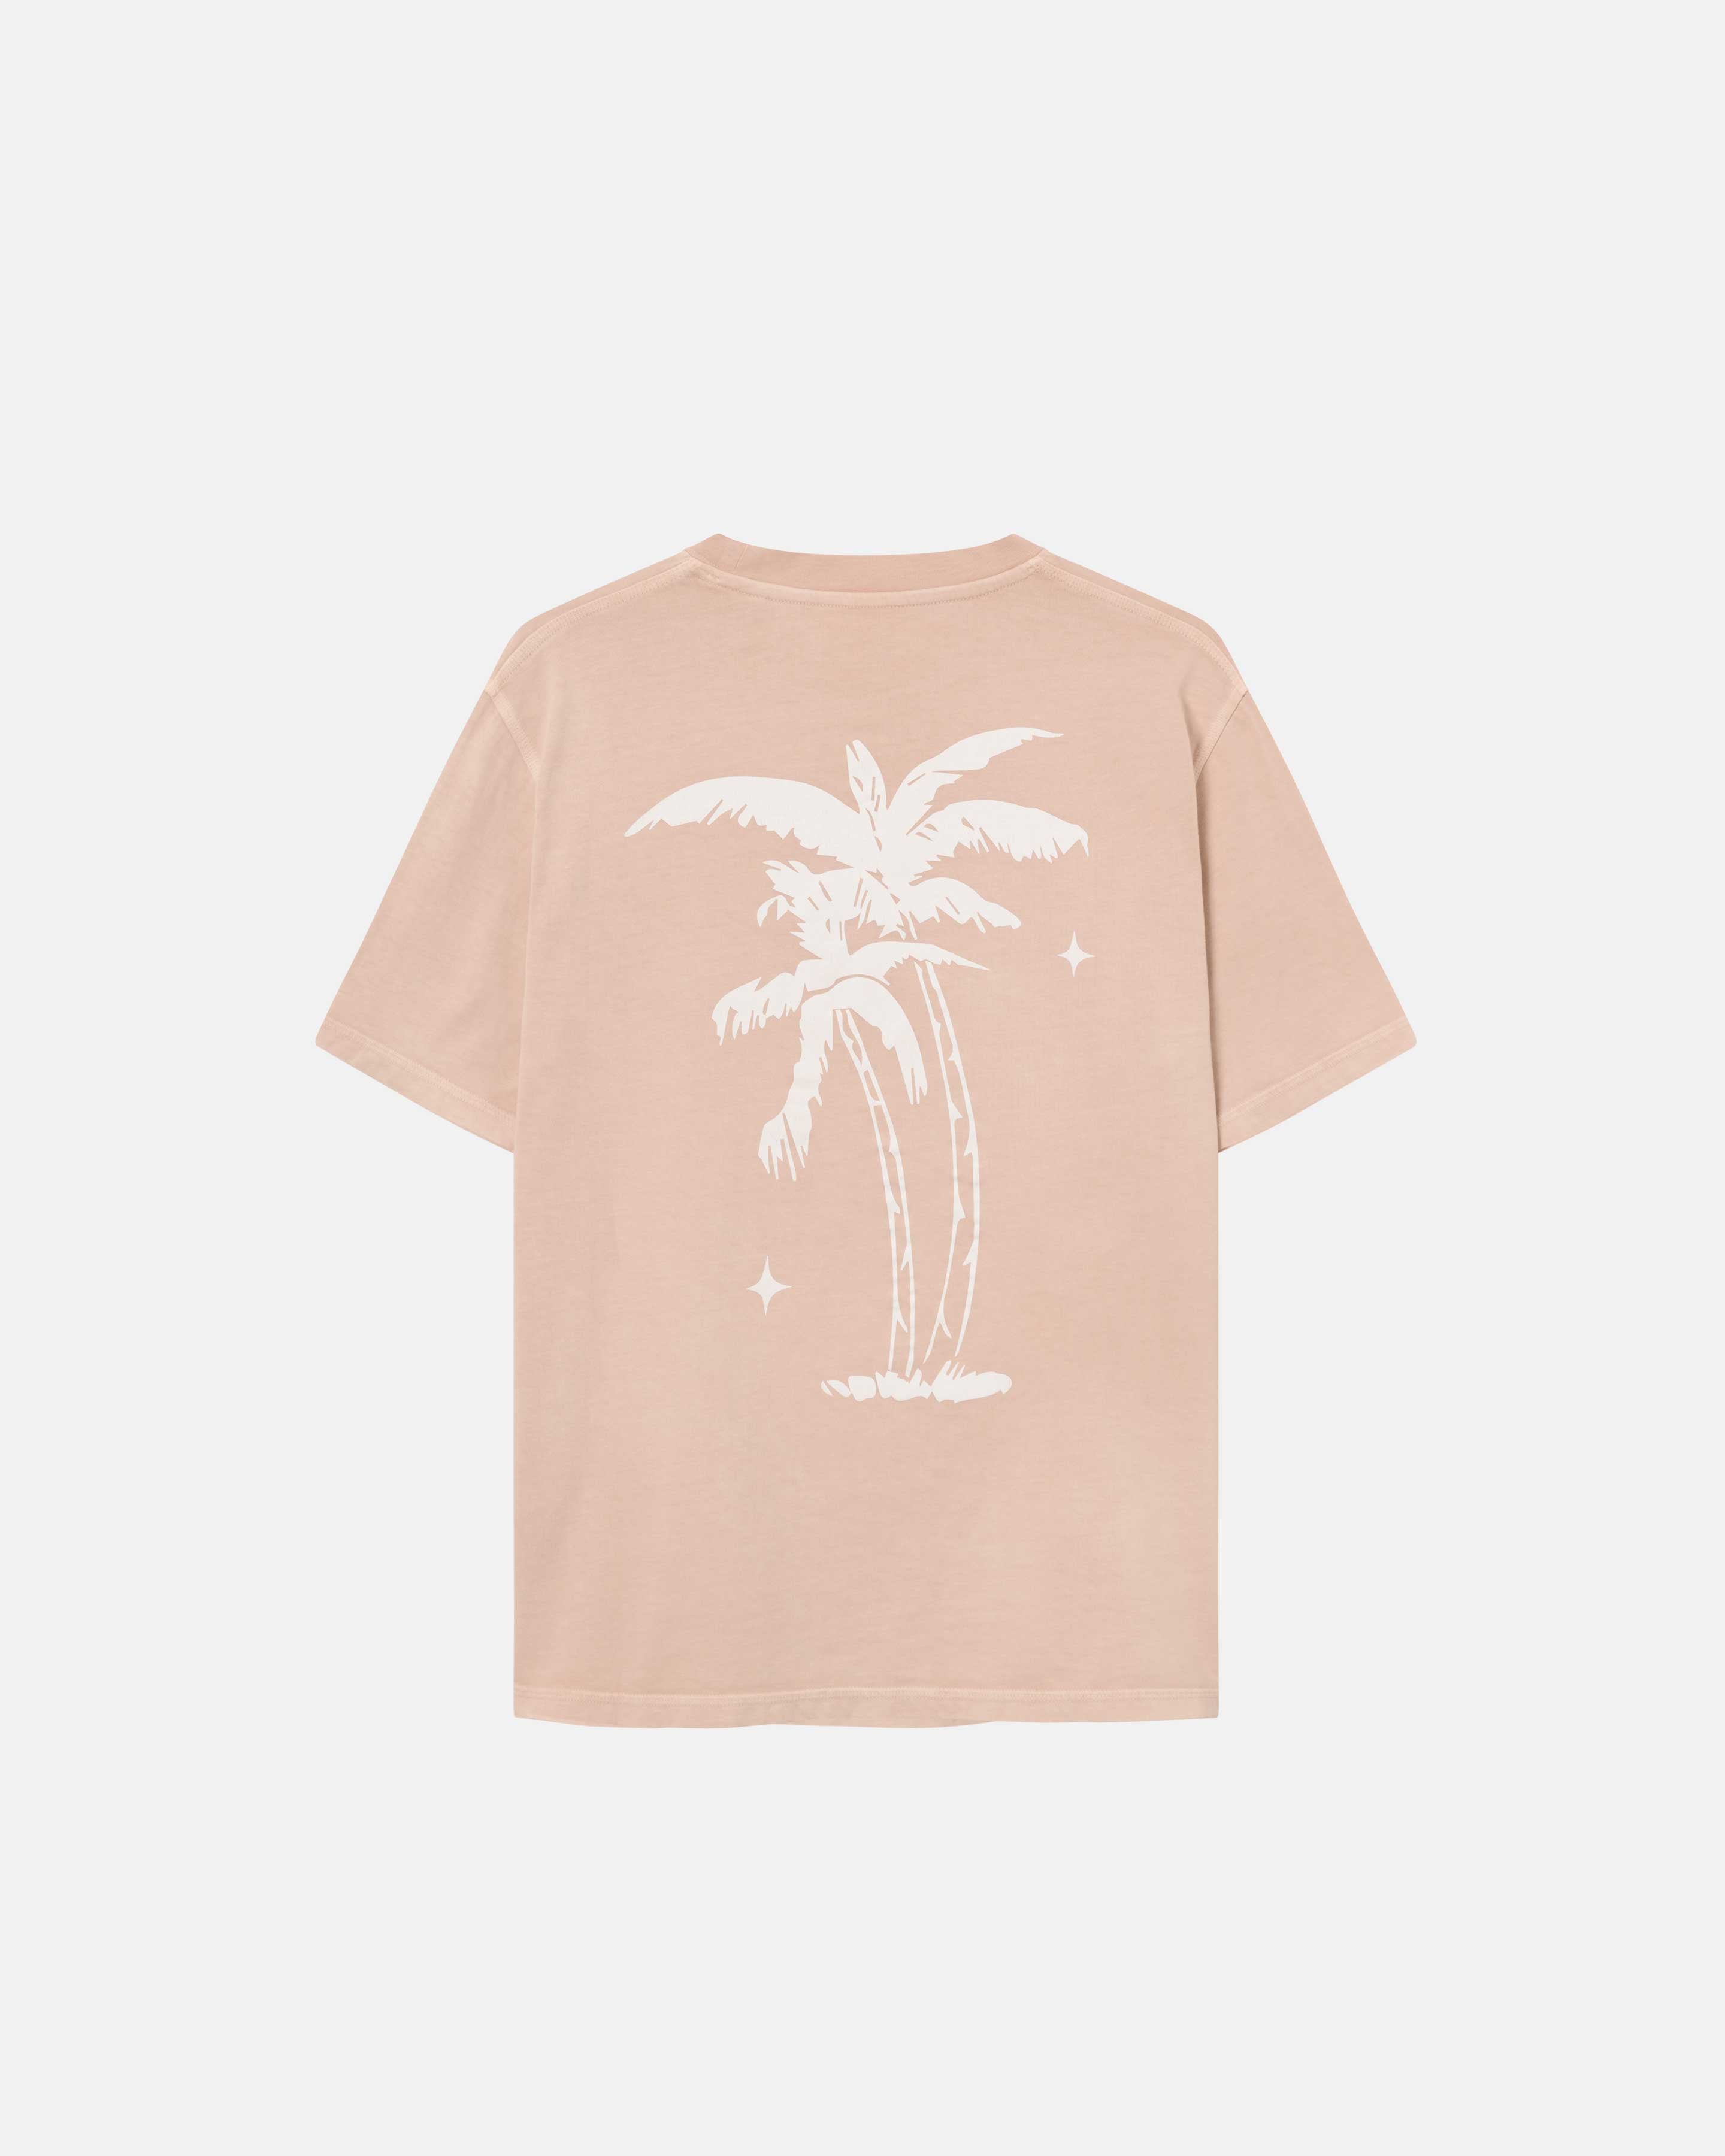 A sand colored t-shirt with palm print on its back